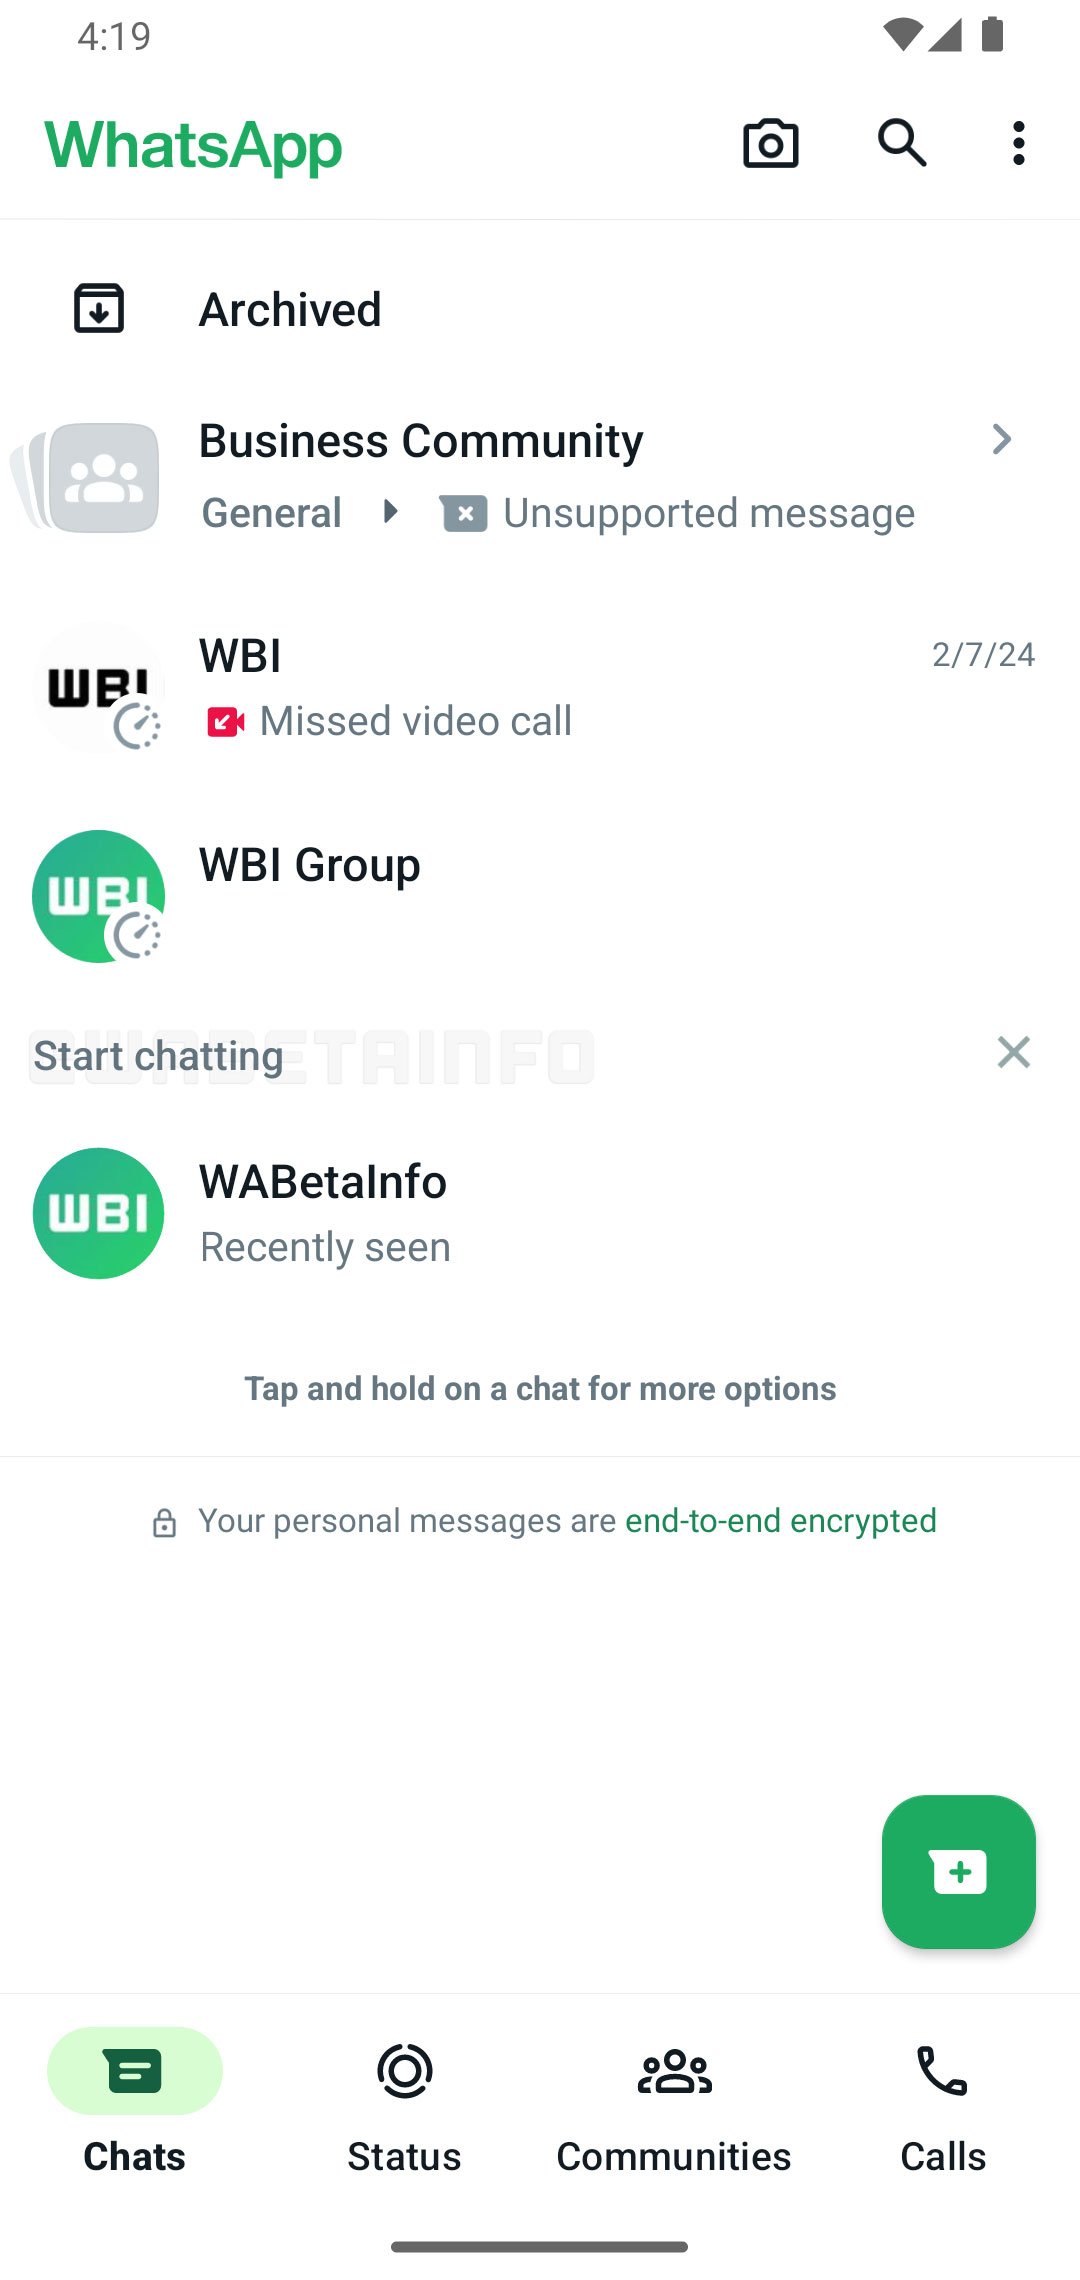 Thanks to the latest WhatsApp beta for Android 2.24.9.5 update, which is available on the Google Play Store, we discovered that WhatsApp is now rolling out the feature to suggest contacts to chat with. — WABetaInfo website